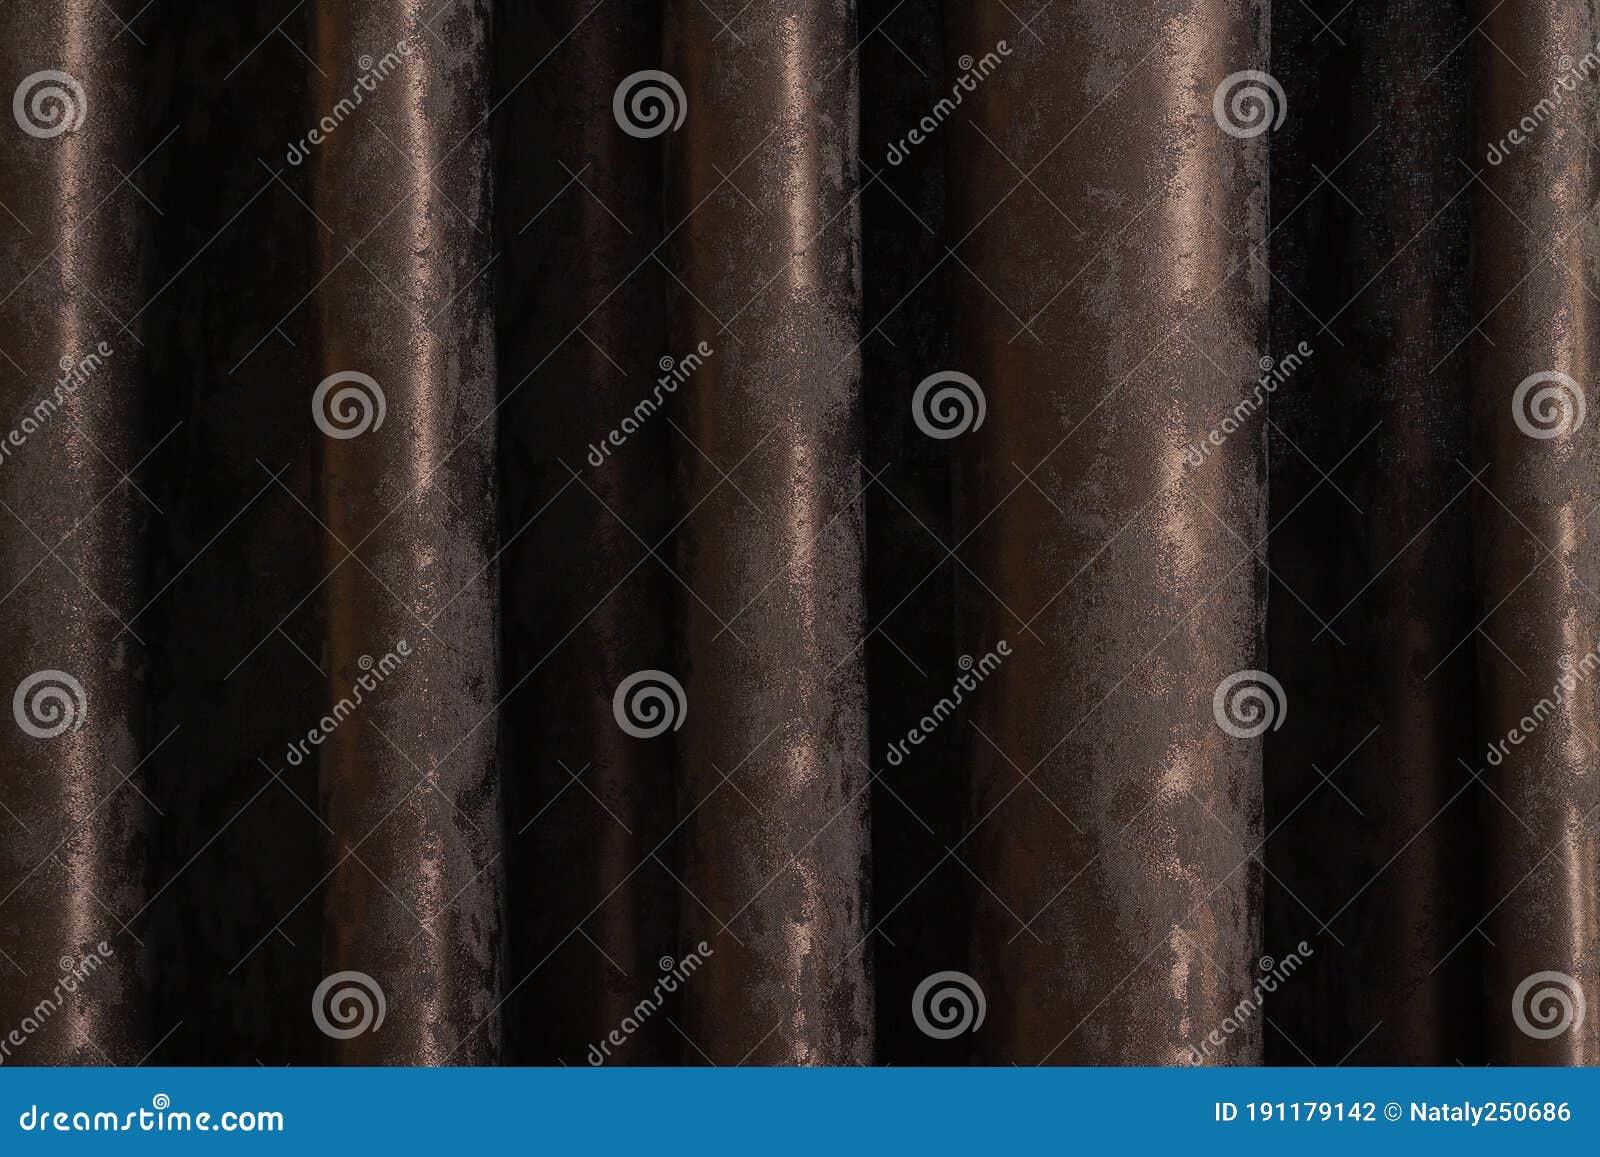 brown thick curtains with pleat texture macro wallpaper